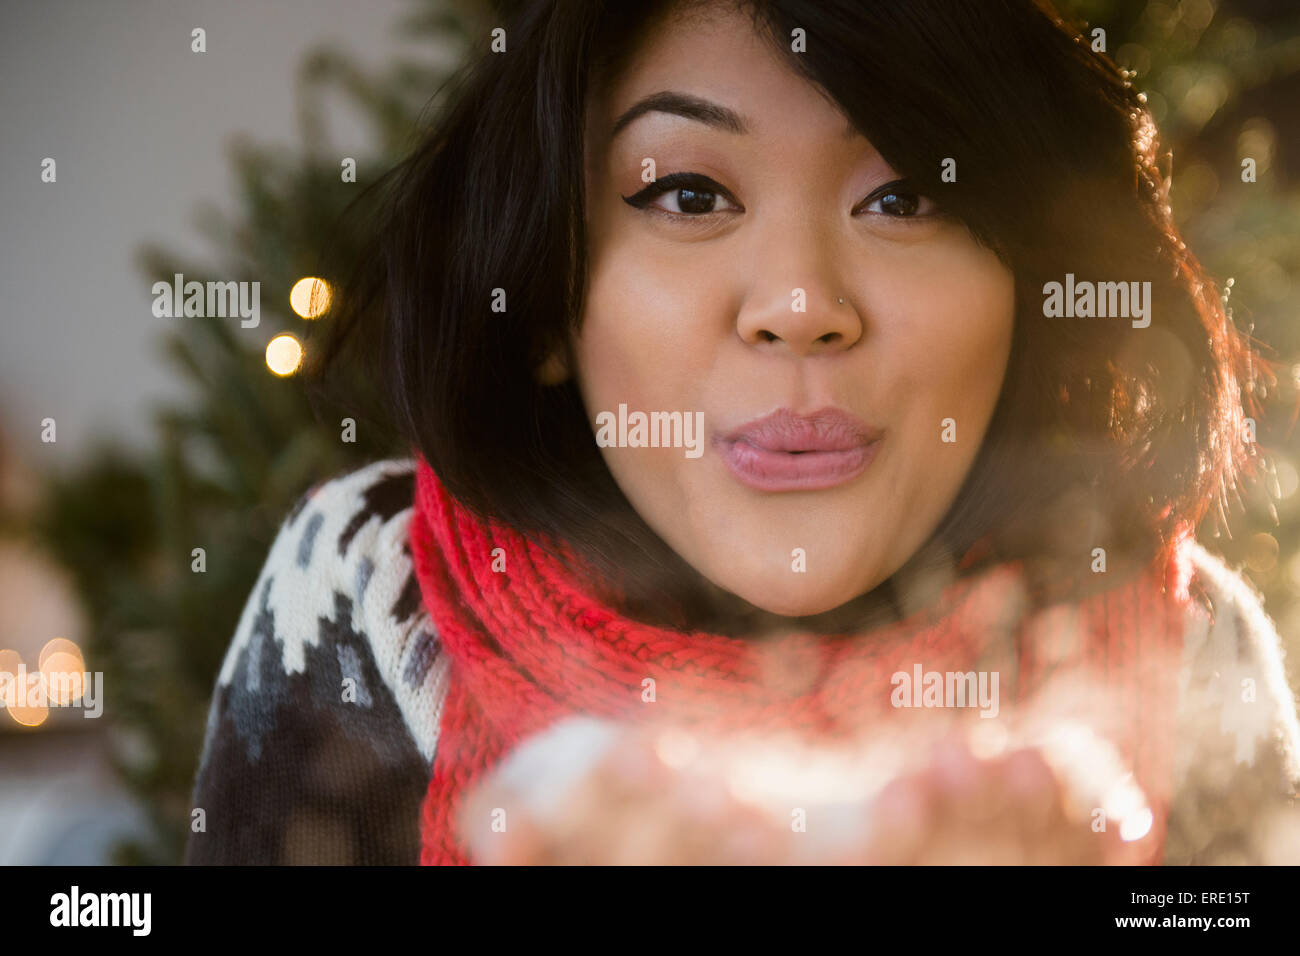 Pacific Islander woman blowing snow at Christmas Stock Photo